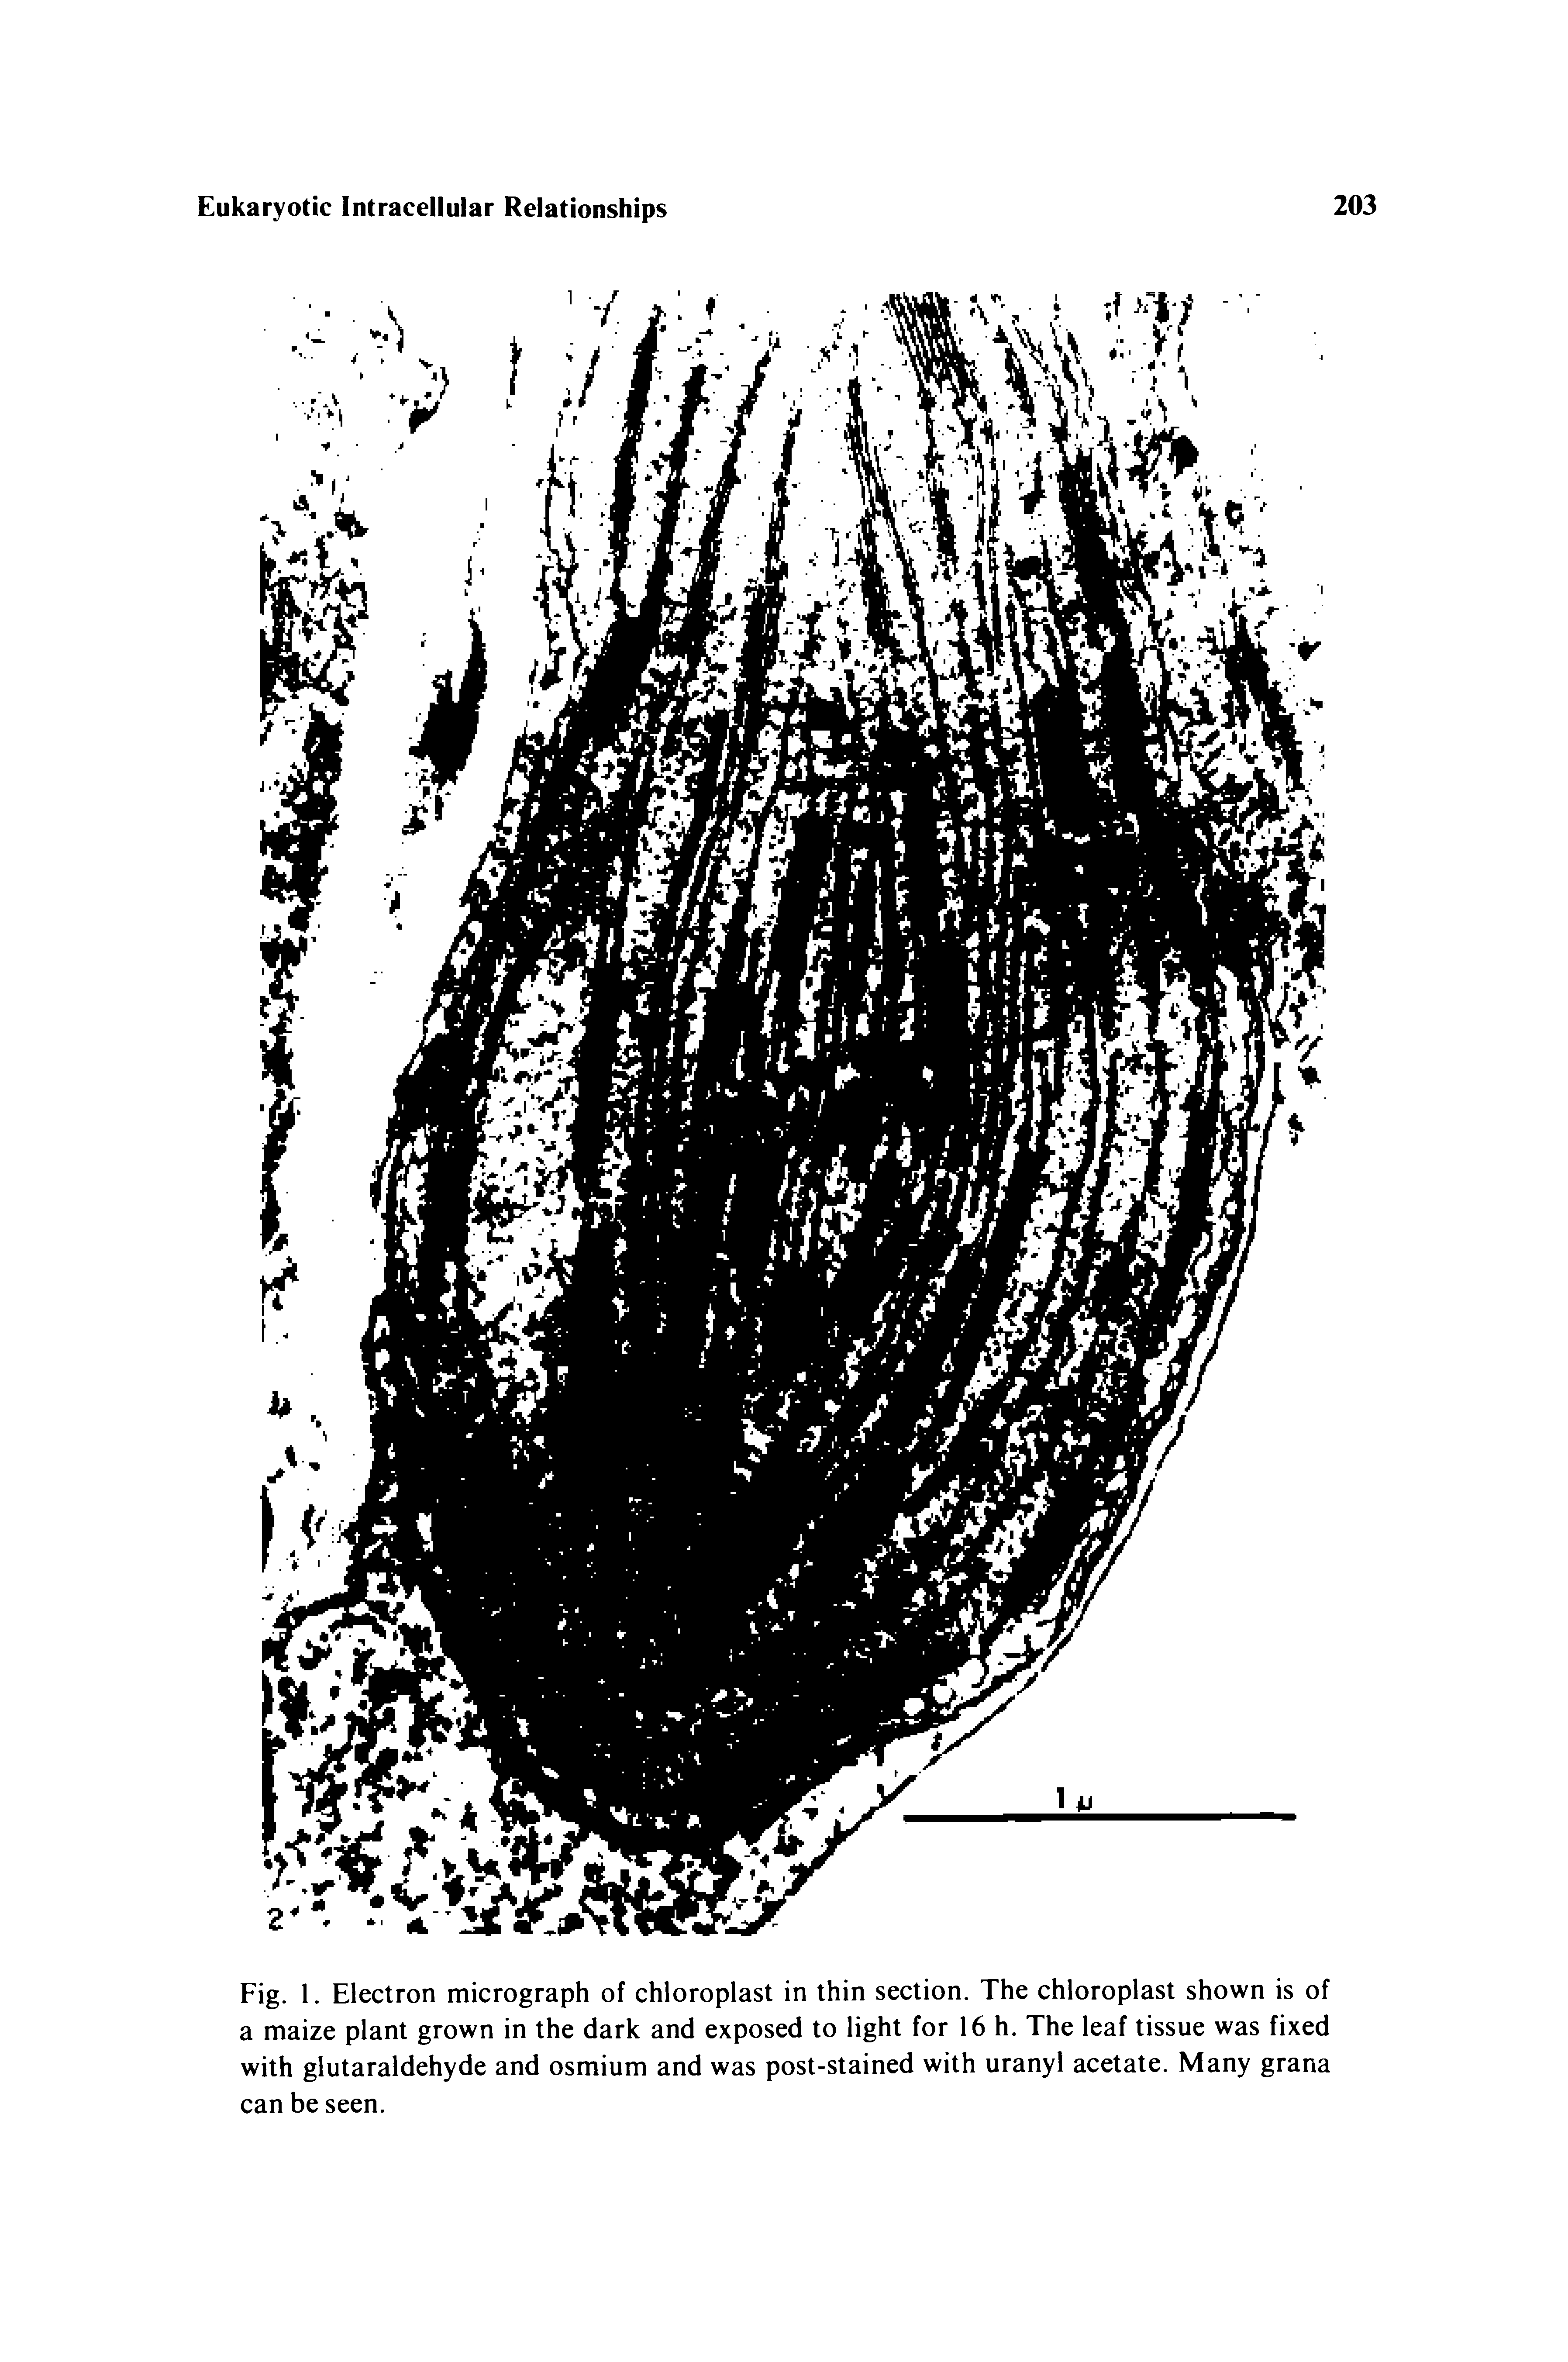 Fig. 1. Electron micrograph of chloroplast in thin section. The chloroplast shown is of a maize plant grown in the dark and exposed to light for 16 h. The leaf tissue was fixed with glutaraldehyde and osmium and was post-stained with uranyl acetate. Many grana can be seen.